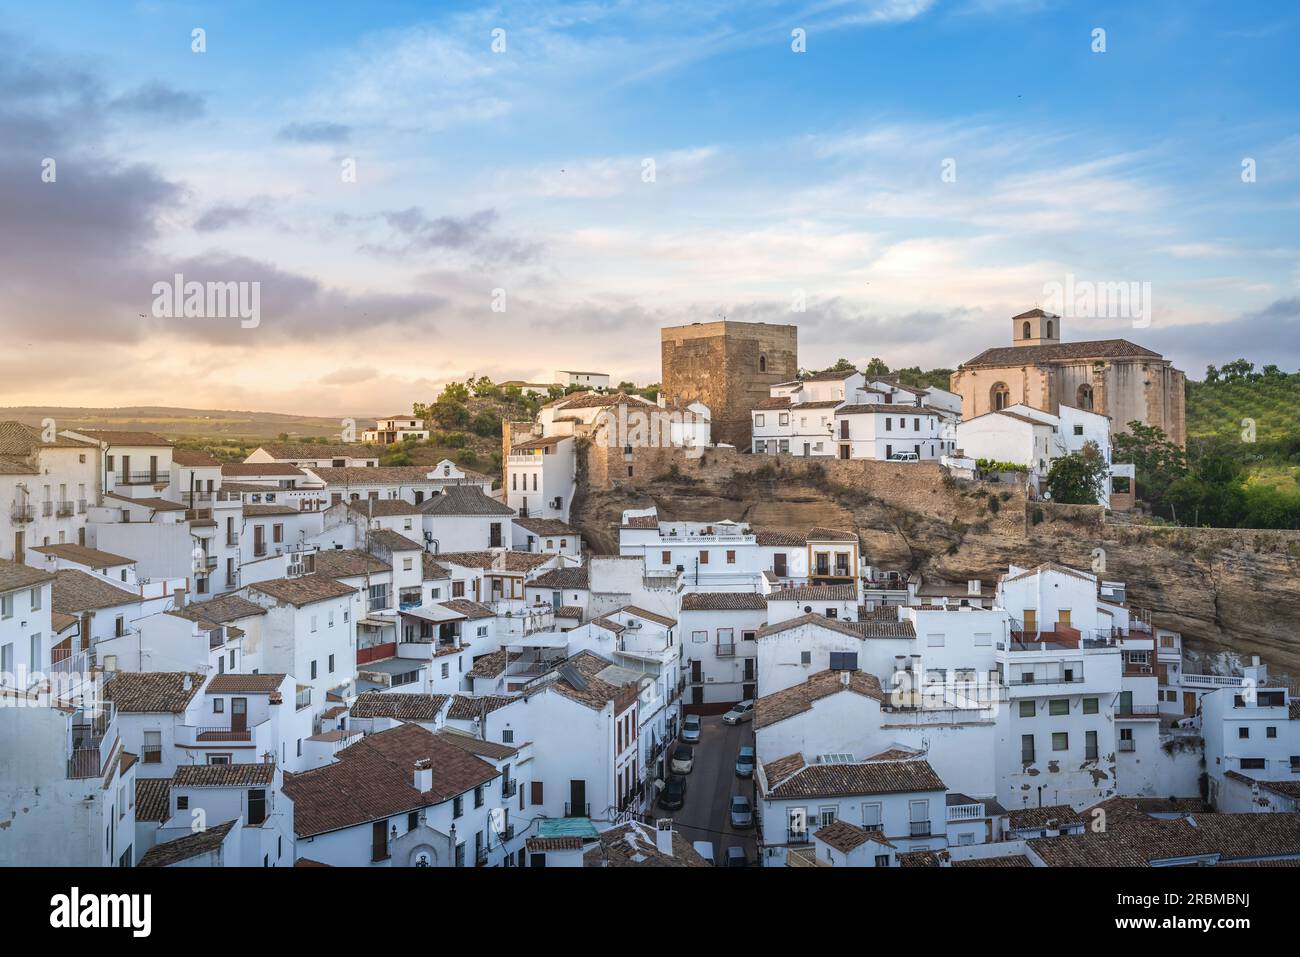 Skyline at sunset with Church of la Encarnacion and Torreon del Homenage Tower - Setenil de las Bodegas, Andalusia, Spain Stock Photo